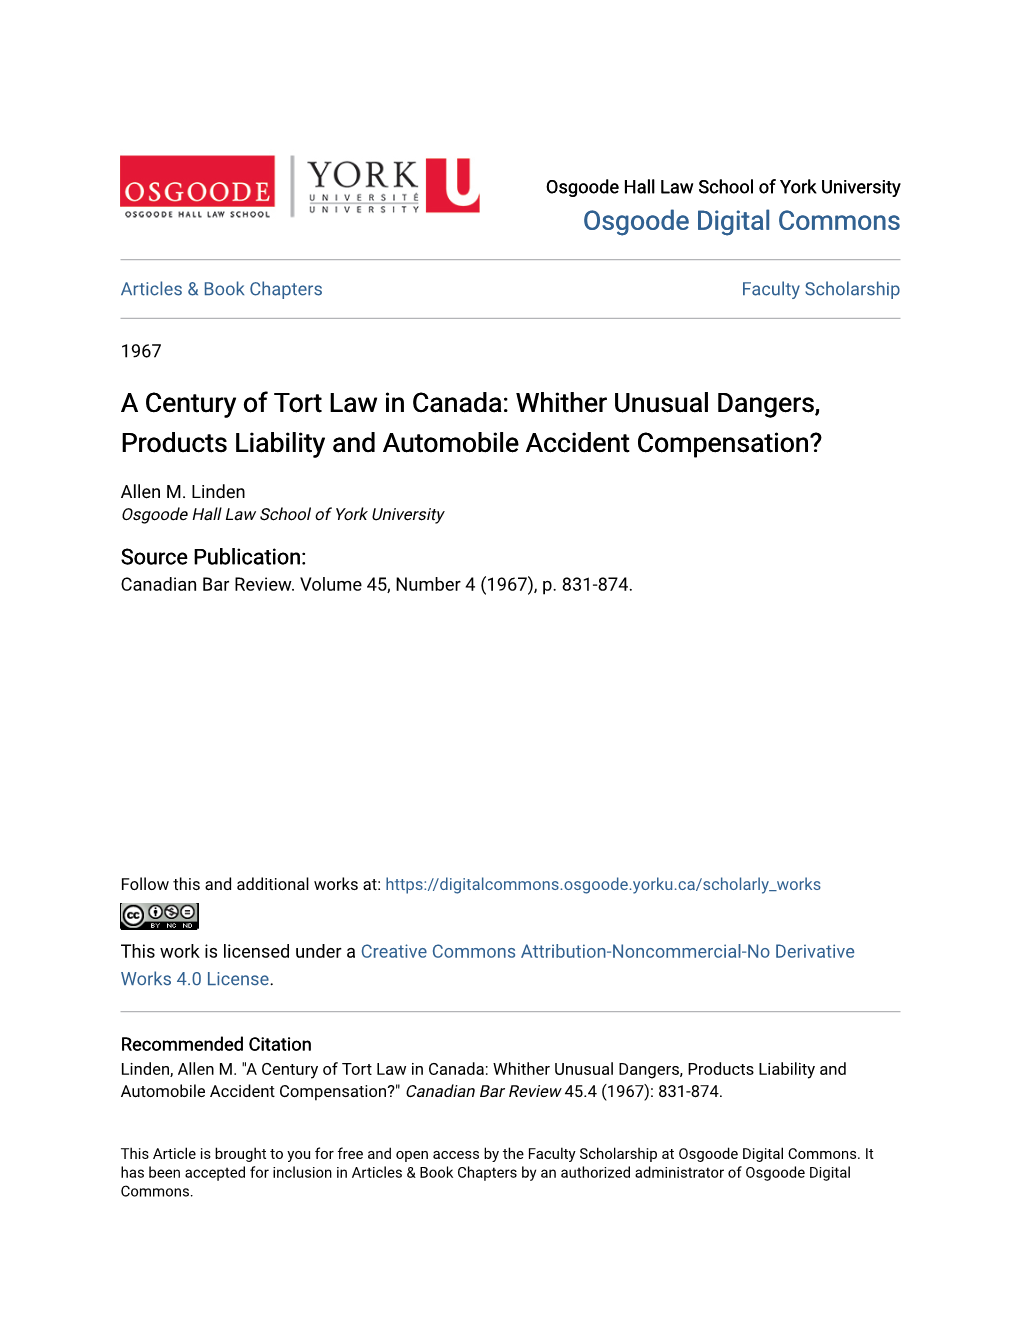 A Century of Tort Law in Canada: Whither Unusual Dangers, Products Liability and Automobile Accident Compensation?